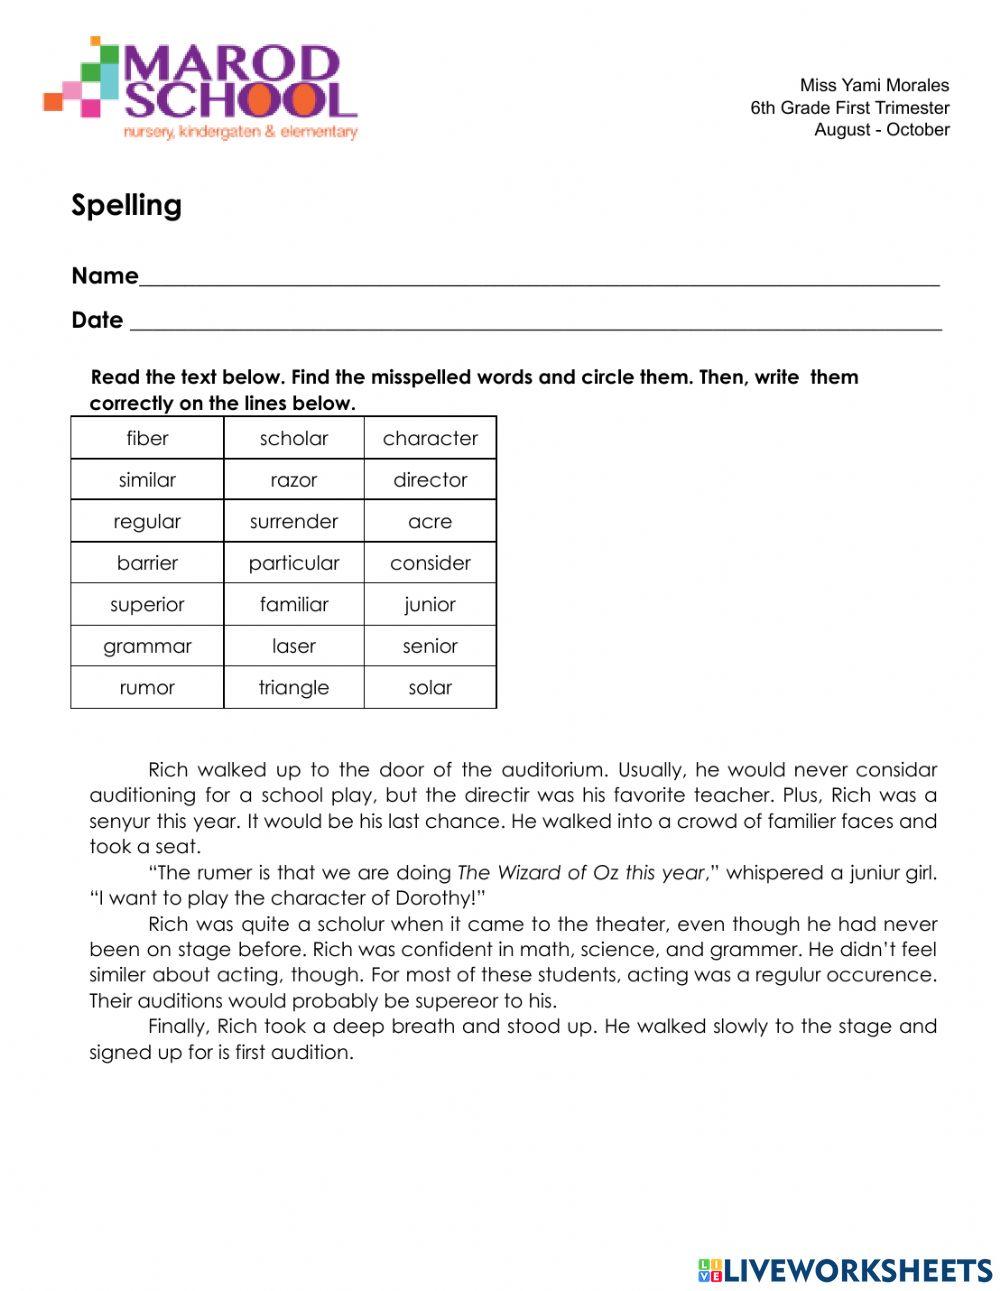 Reading and Writing-Spelling Exam